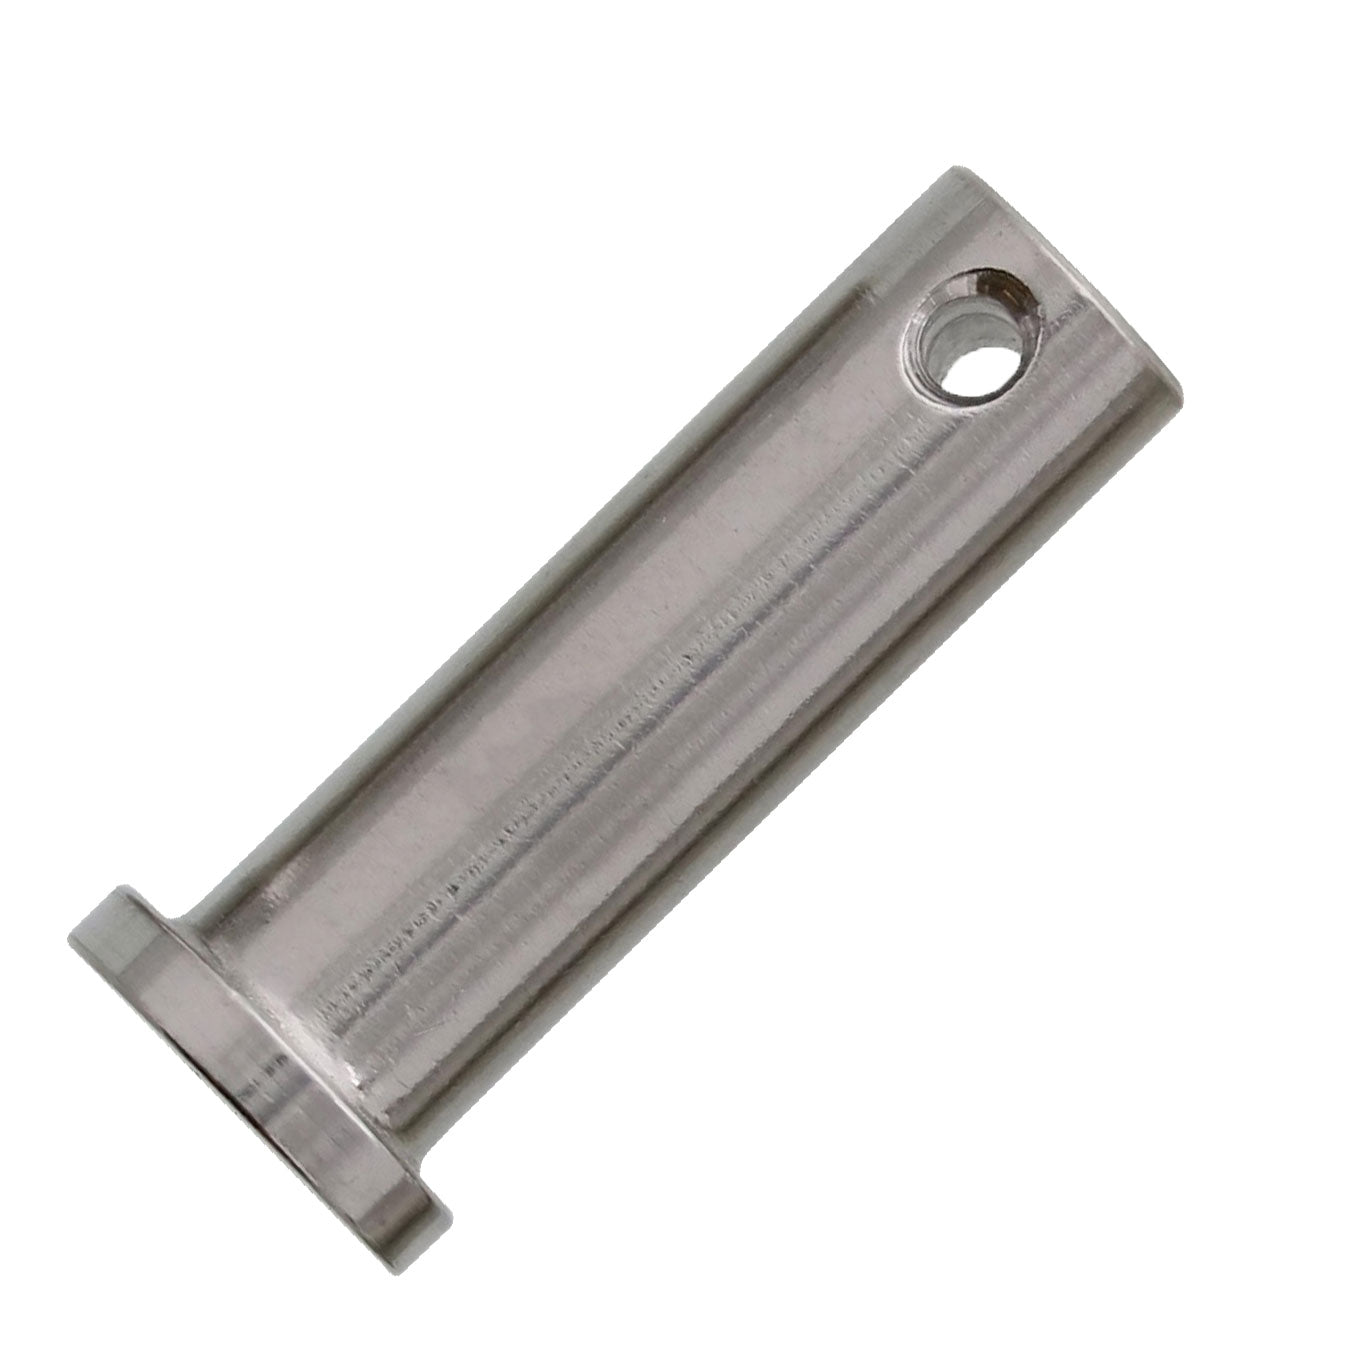 10mm x 25mm Stainless Steel Clevis Pin